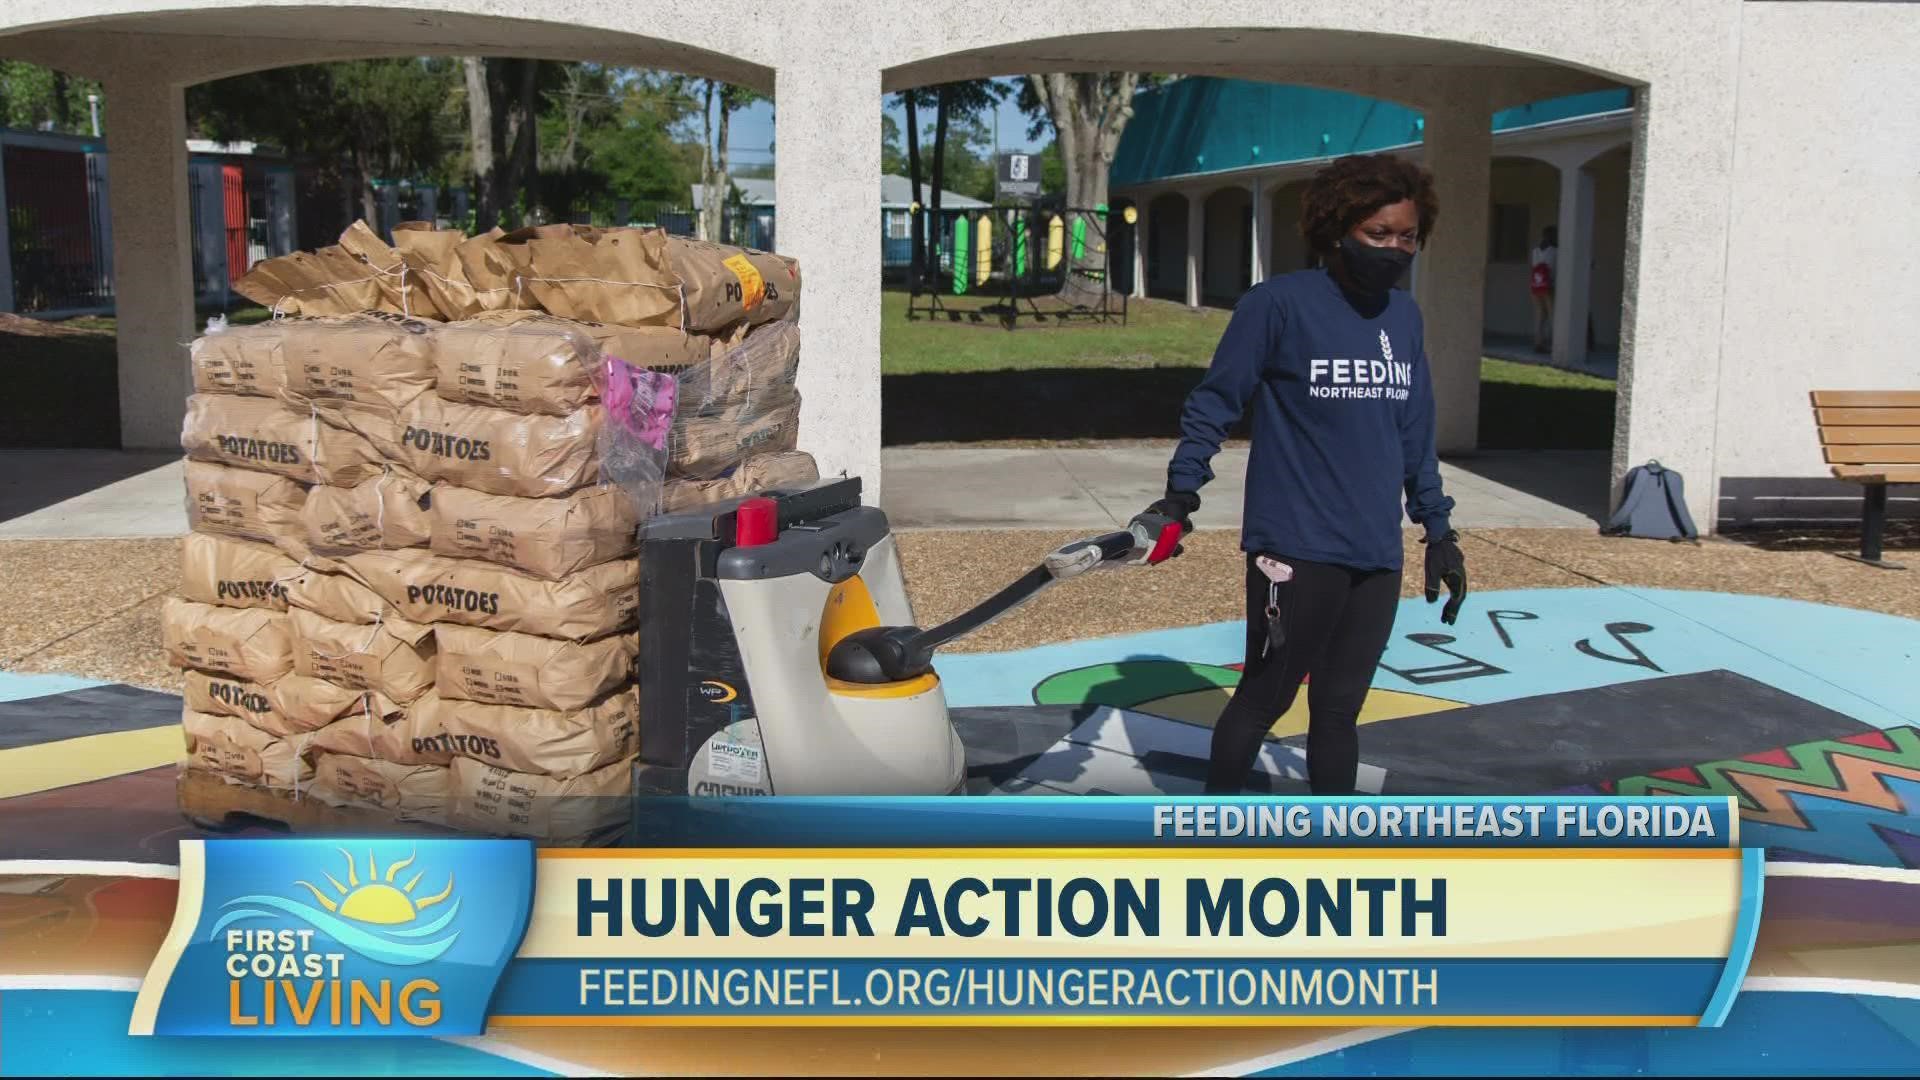 September is Hunger Action Month and it's a reminder that 1 in 5 children are faced with food insecurity here on the First Coast year-round. Your help is needed.